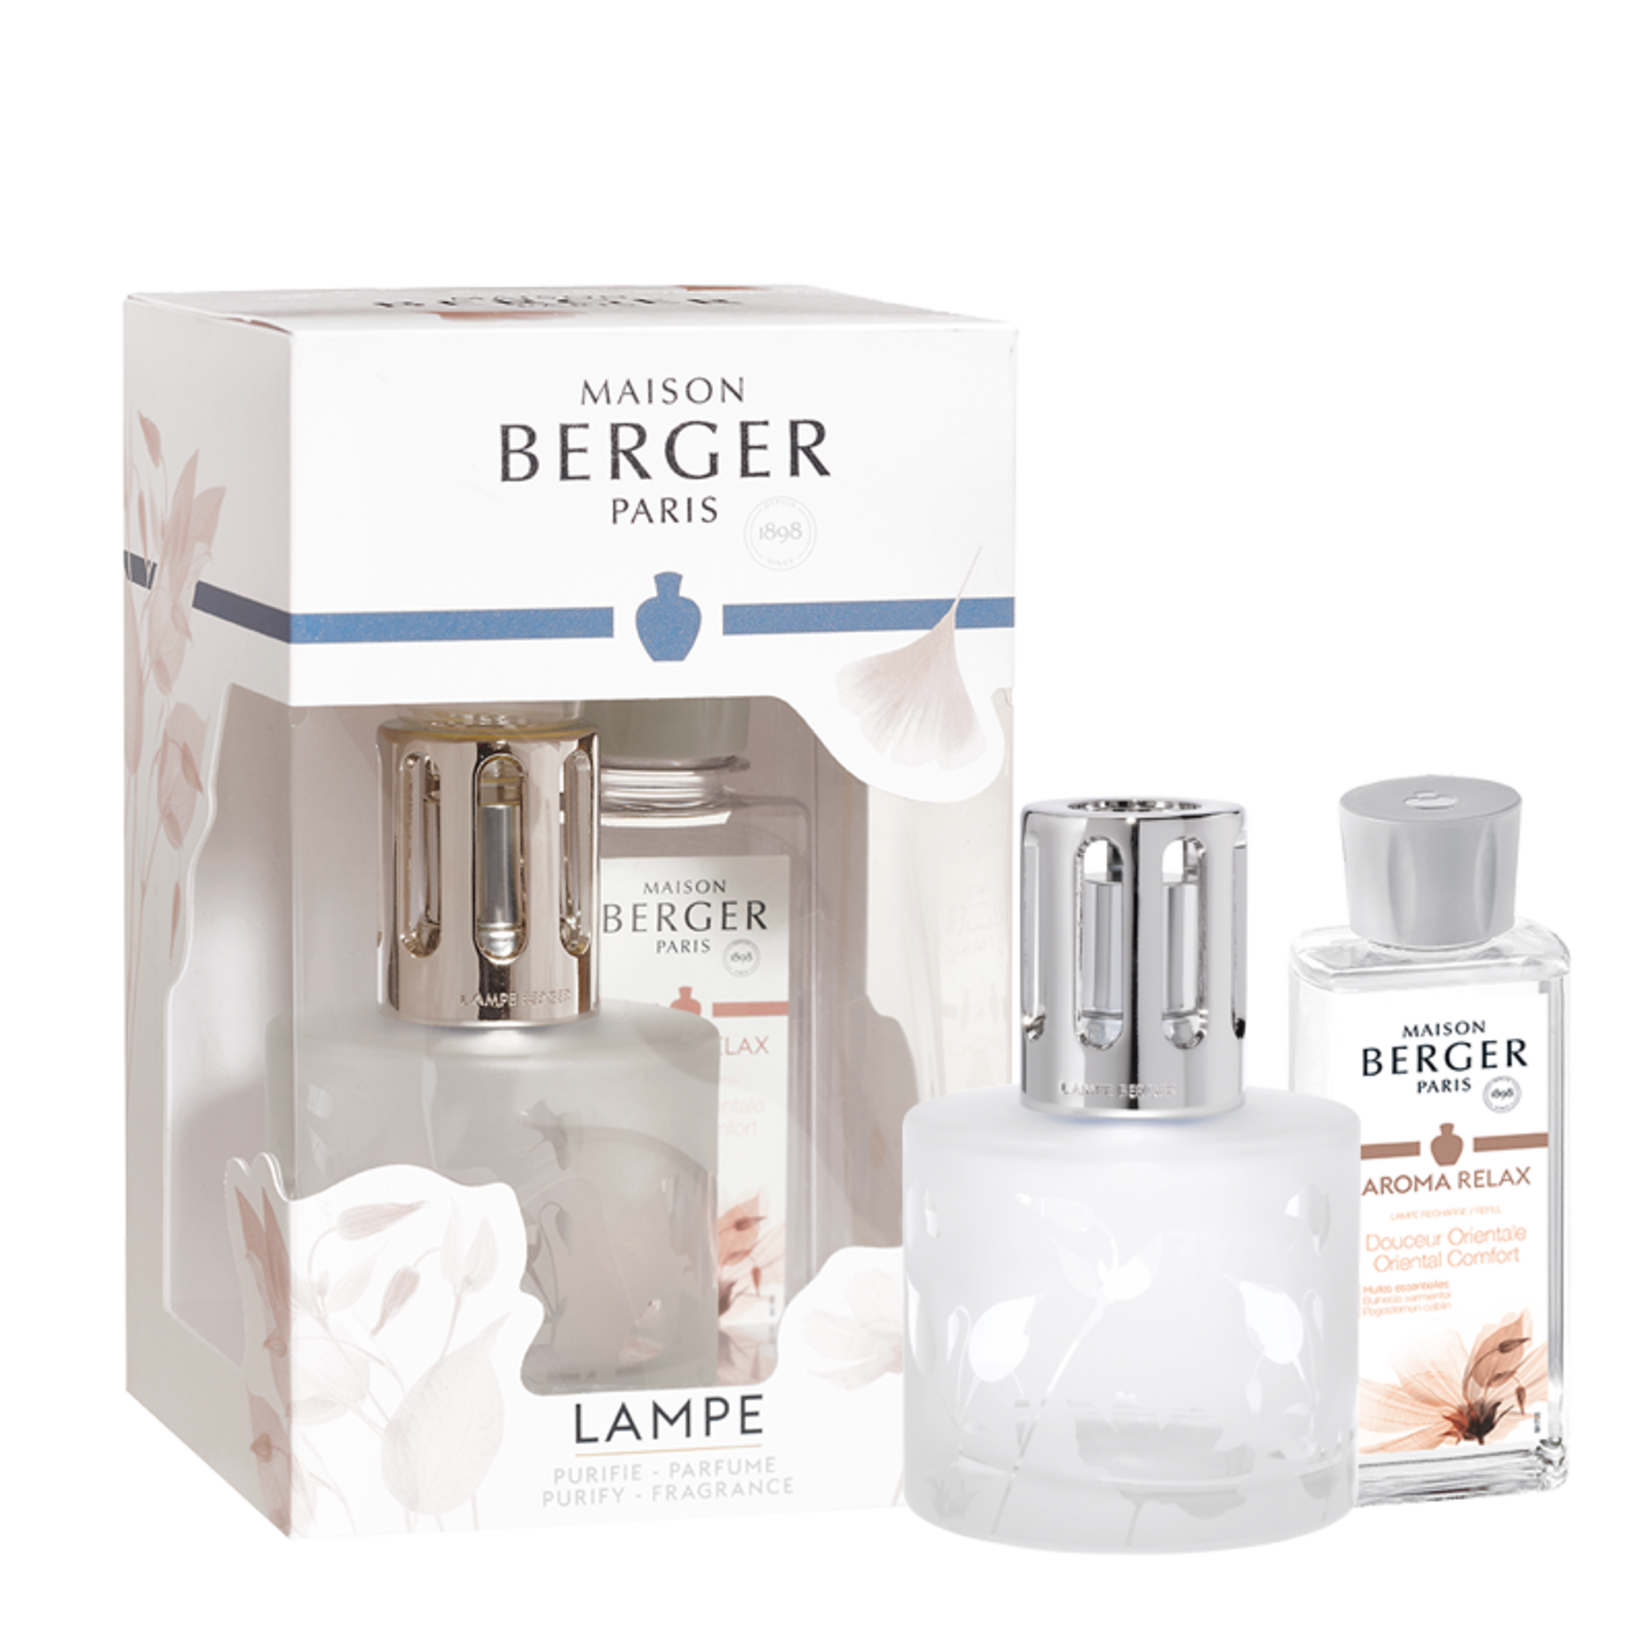 Aroma Fragrance diffuser with scent Happy - Maison Berger Paris